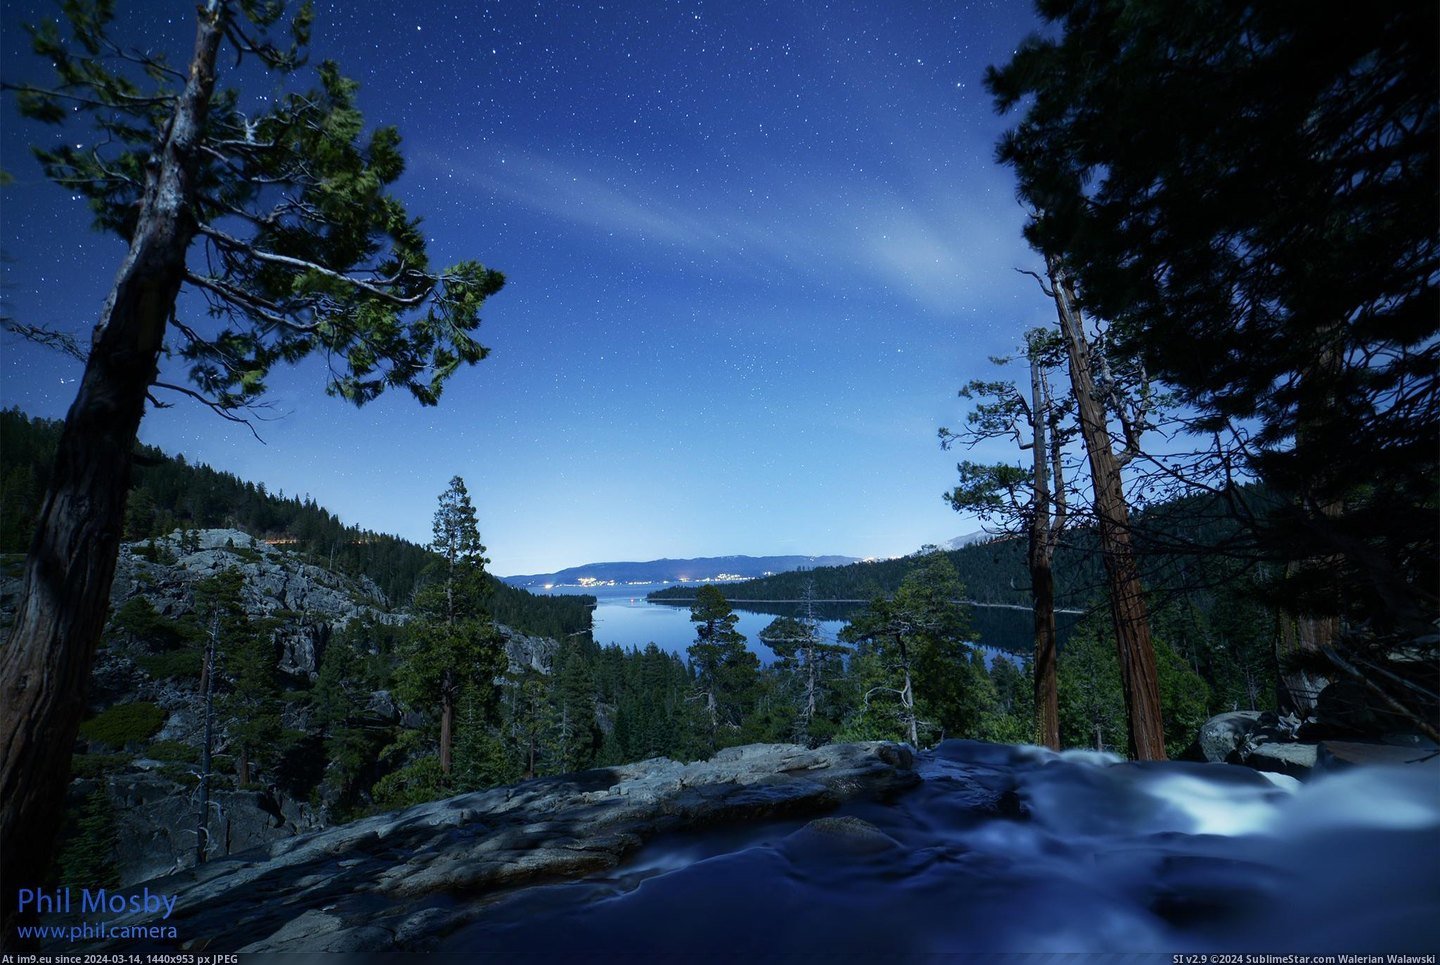 #Night #Lake #Falls #Tahoe #Emerald #2048x1367 #Phil #Bay #Stars #Eagle [Earthporn] Stars over Eagle Falls - Emerald Bay, Lake Tahoe, the night before last [oc by Phil Mosby][2048x1367] Pic. (Obraz z album My r/EARTHPORN favs))